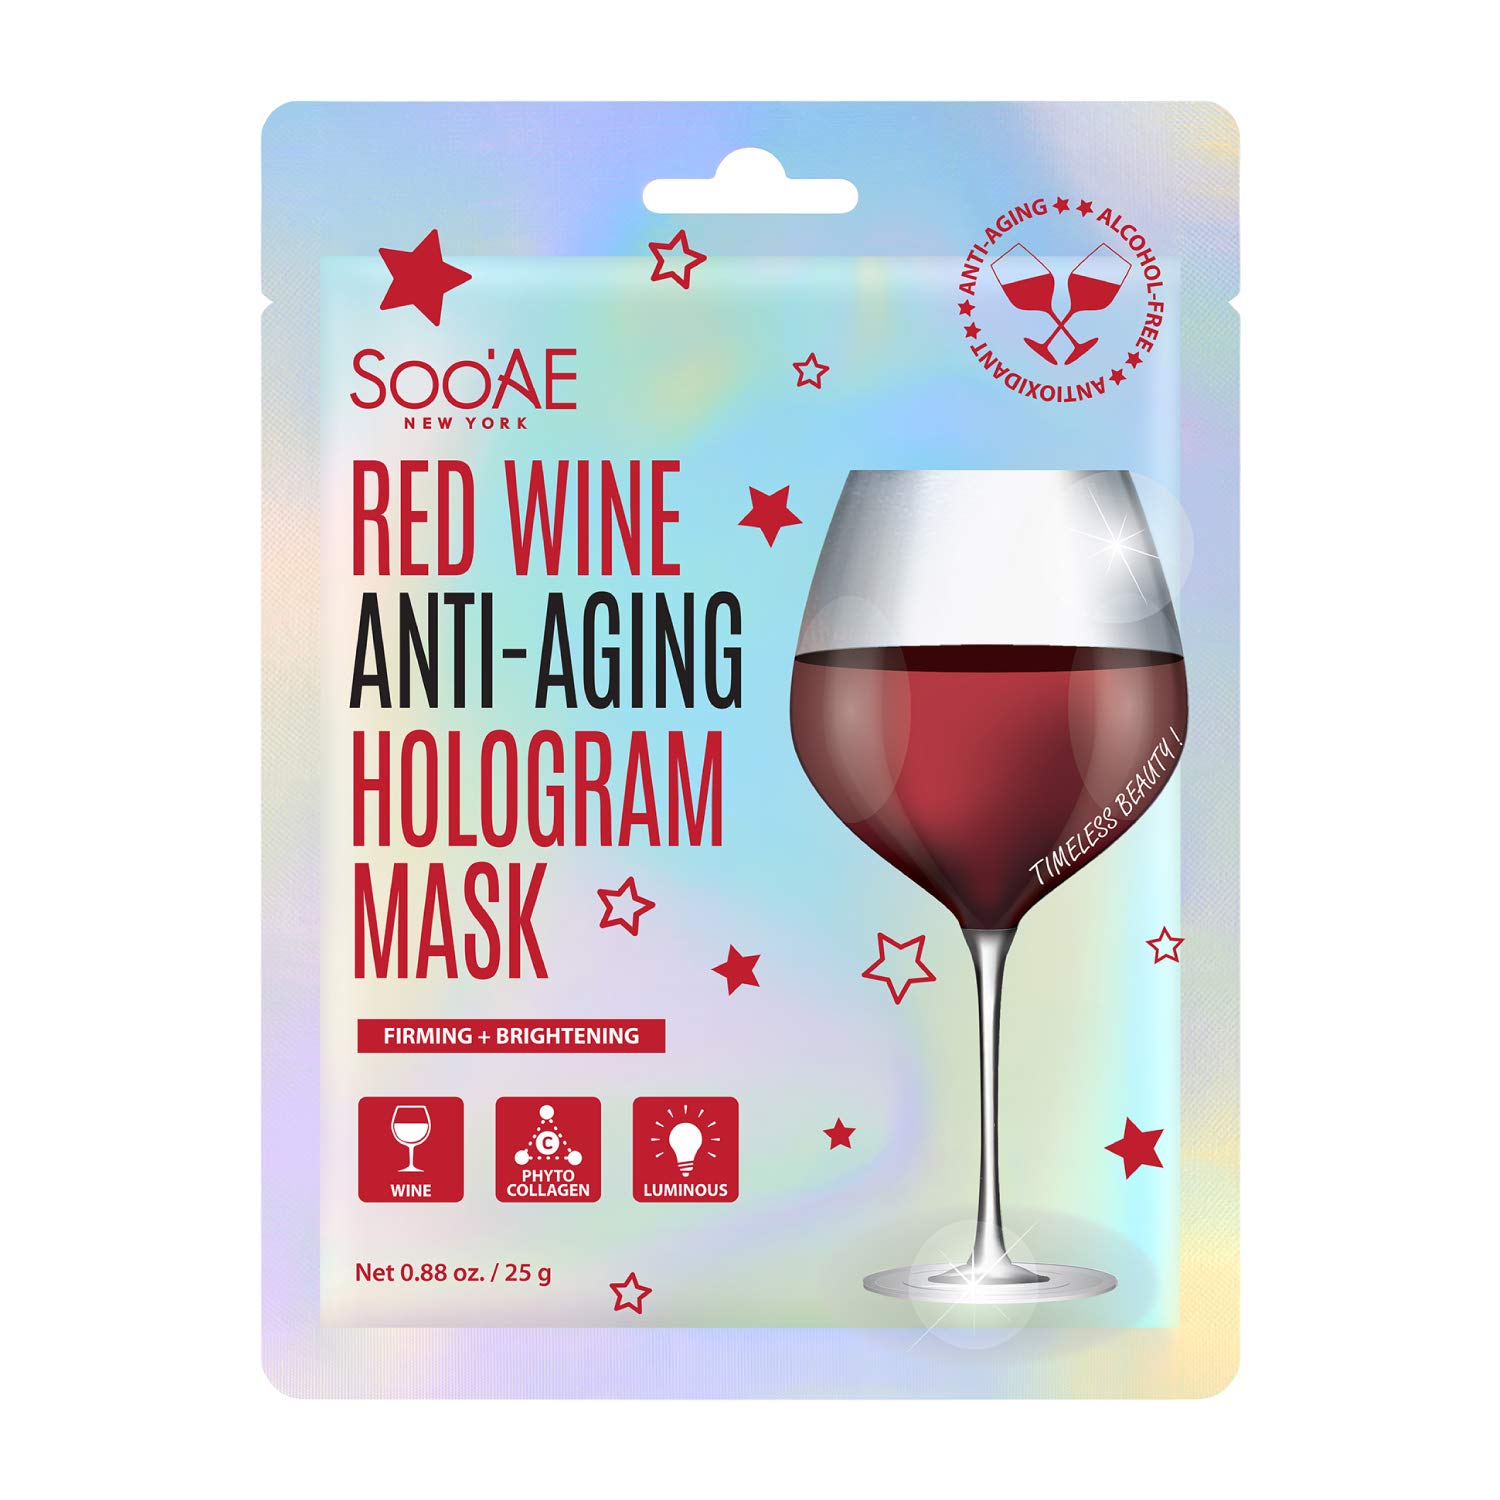 Soo'AE Red Wine Anti-Aging Hologram Mask [12 Count] Vegan Collagen Antioxidants to Firm, Restore and Brightening Skin, Korean Beauty Sheet mask hydrate glow brighting premium facial mask face wrap foil